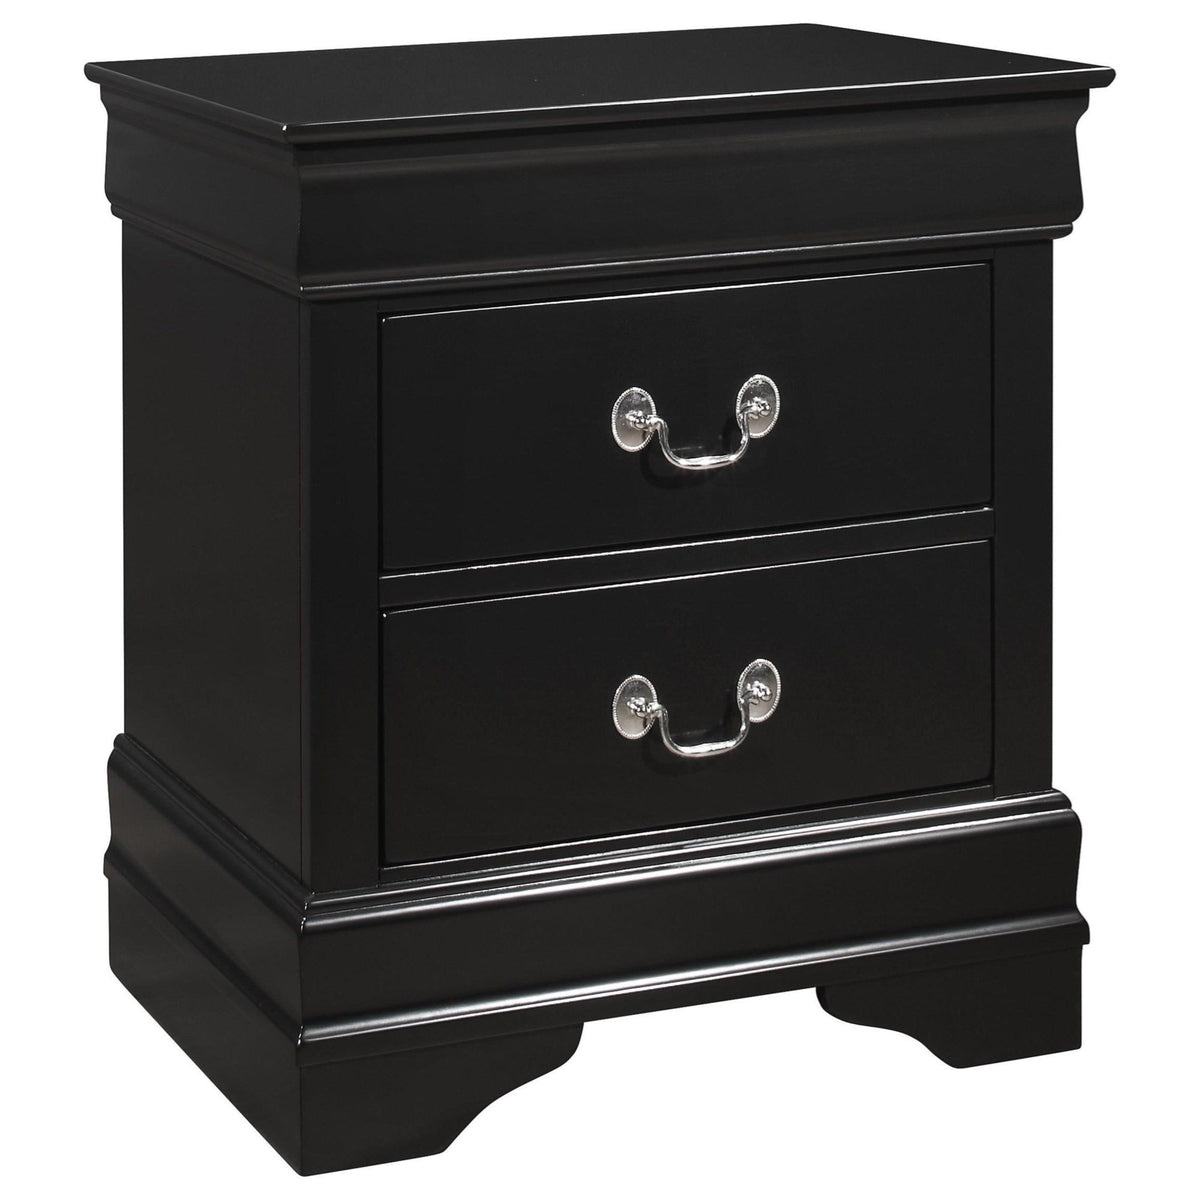 2 Drawers Wooden Frame Nightstand with Antique Metal Pulls, Black - BM215224